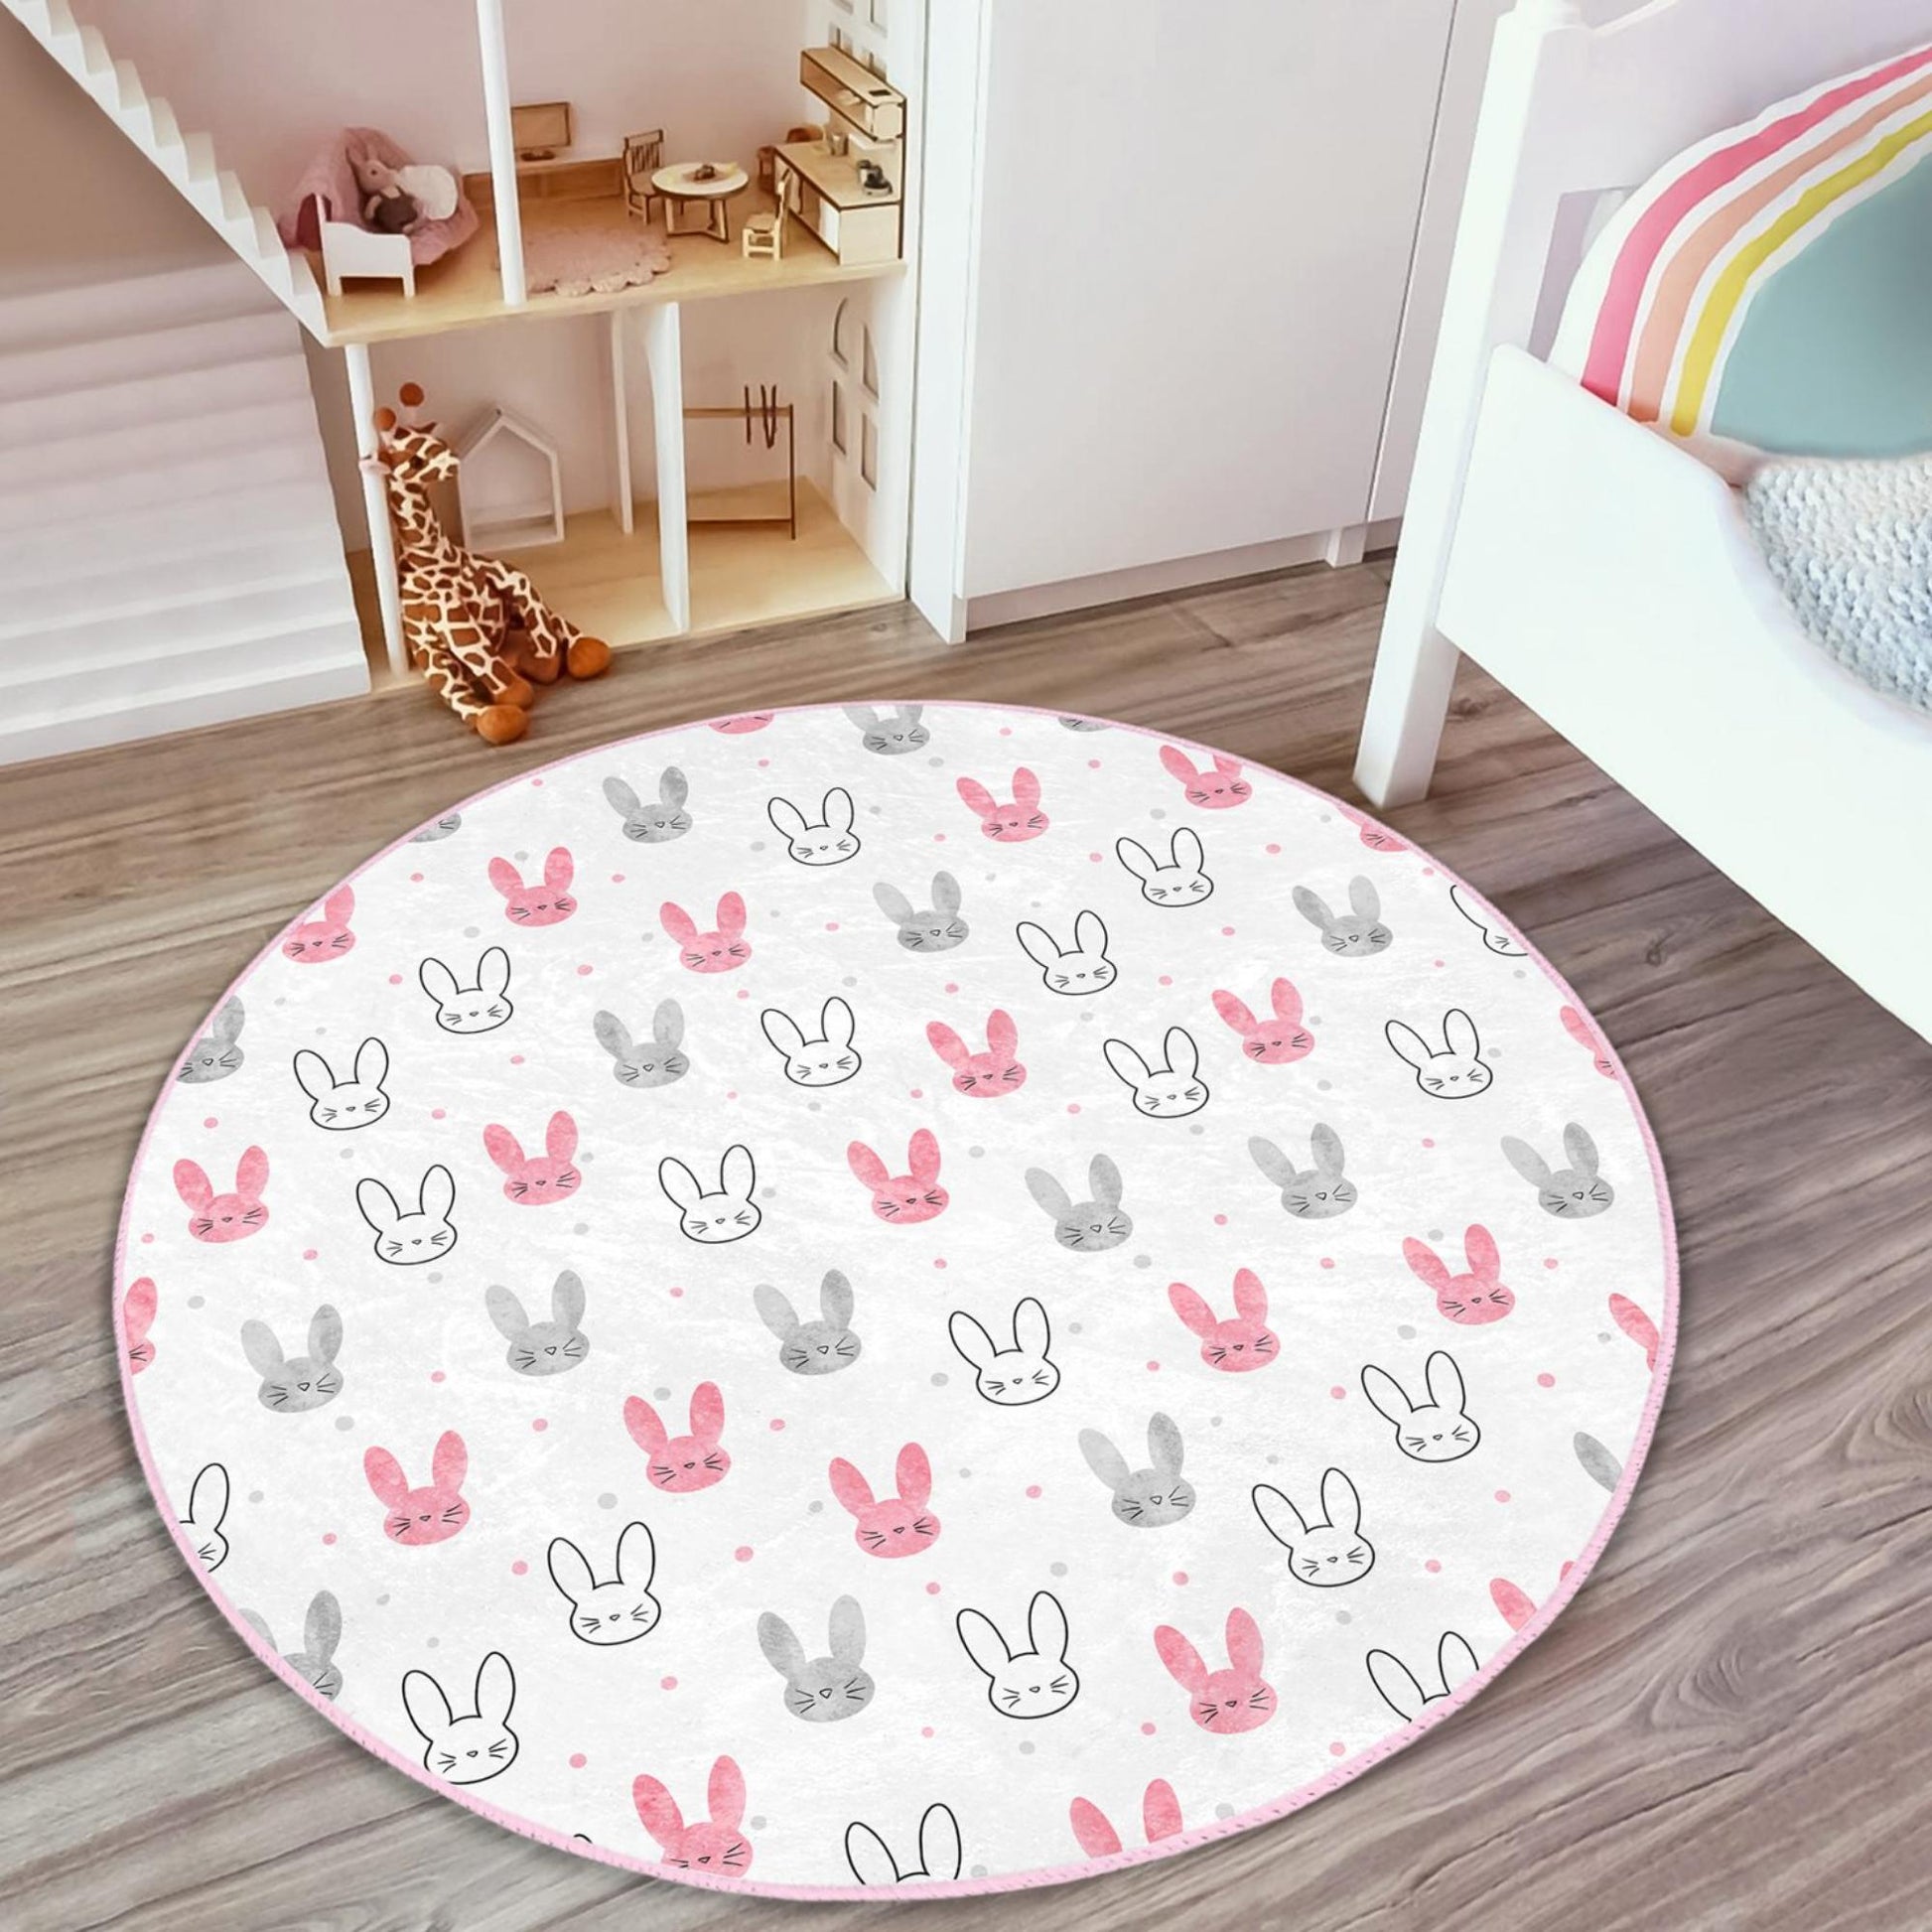 Sweet rabbit-themed rug perfect for adding charm to kids' rooms.